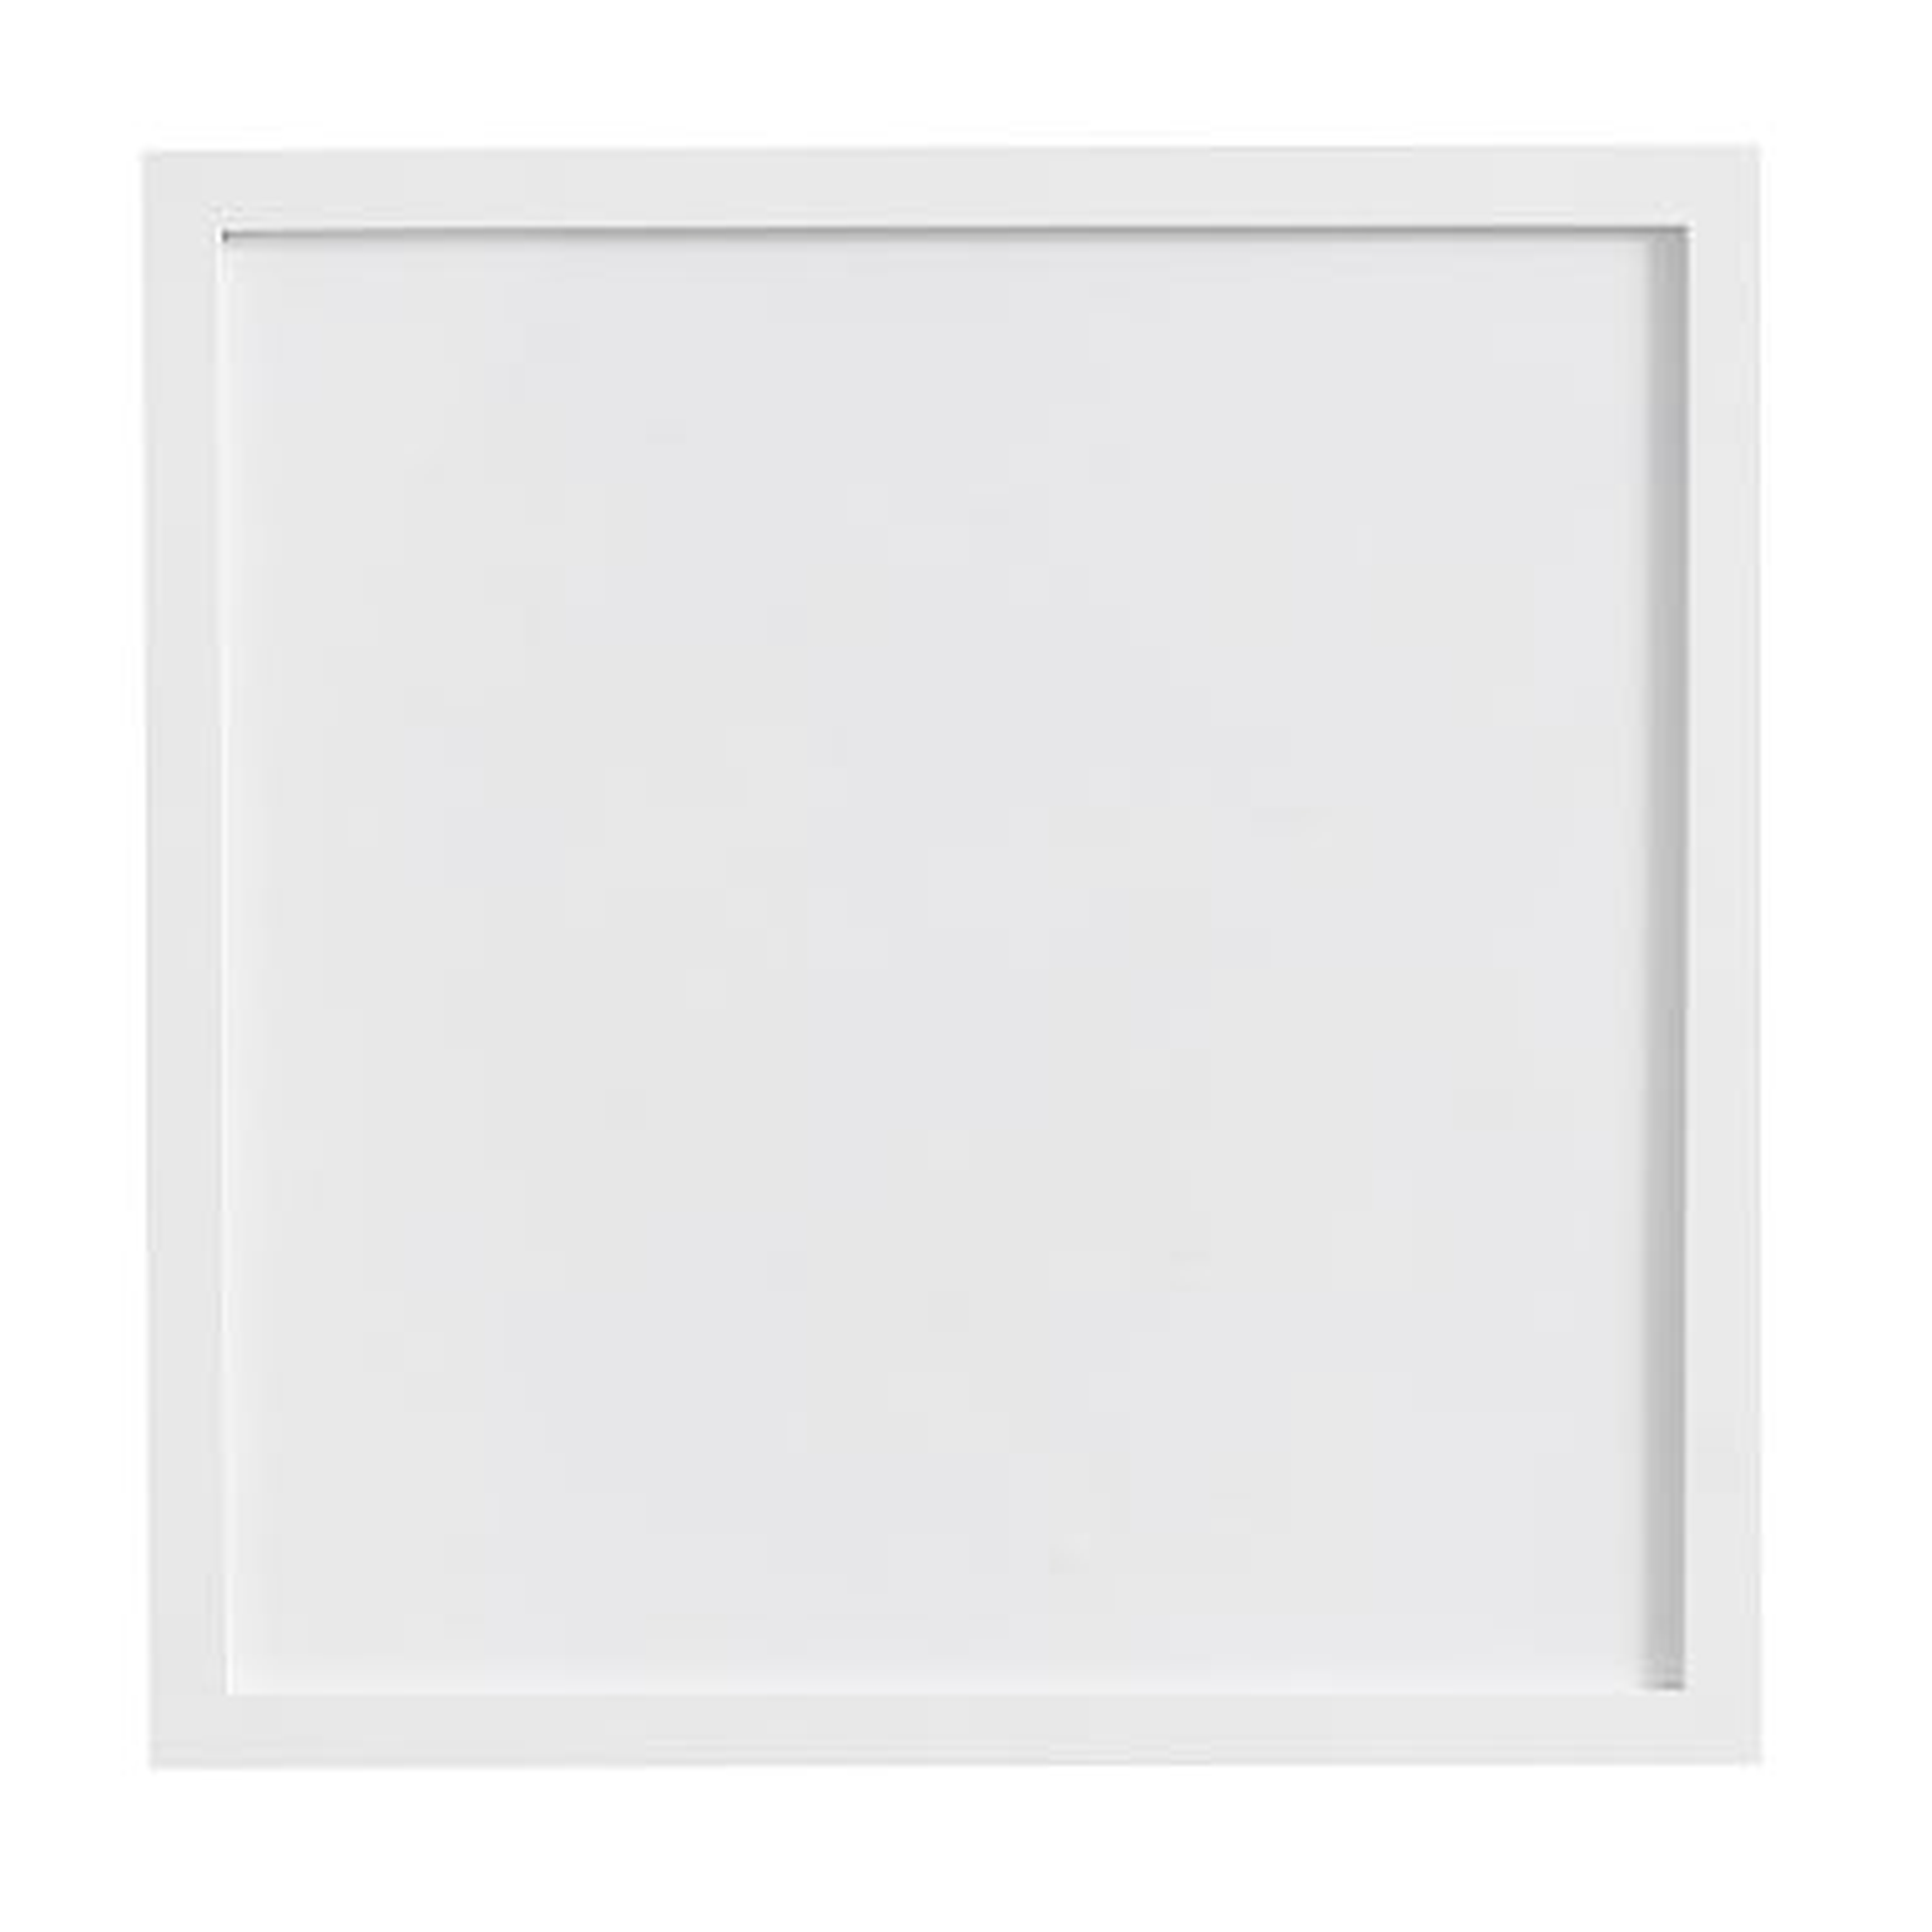 No Nails Study Wall Boards, Dry Erase, White - Pottery Barn Teen